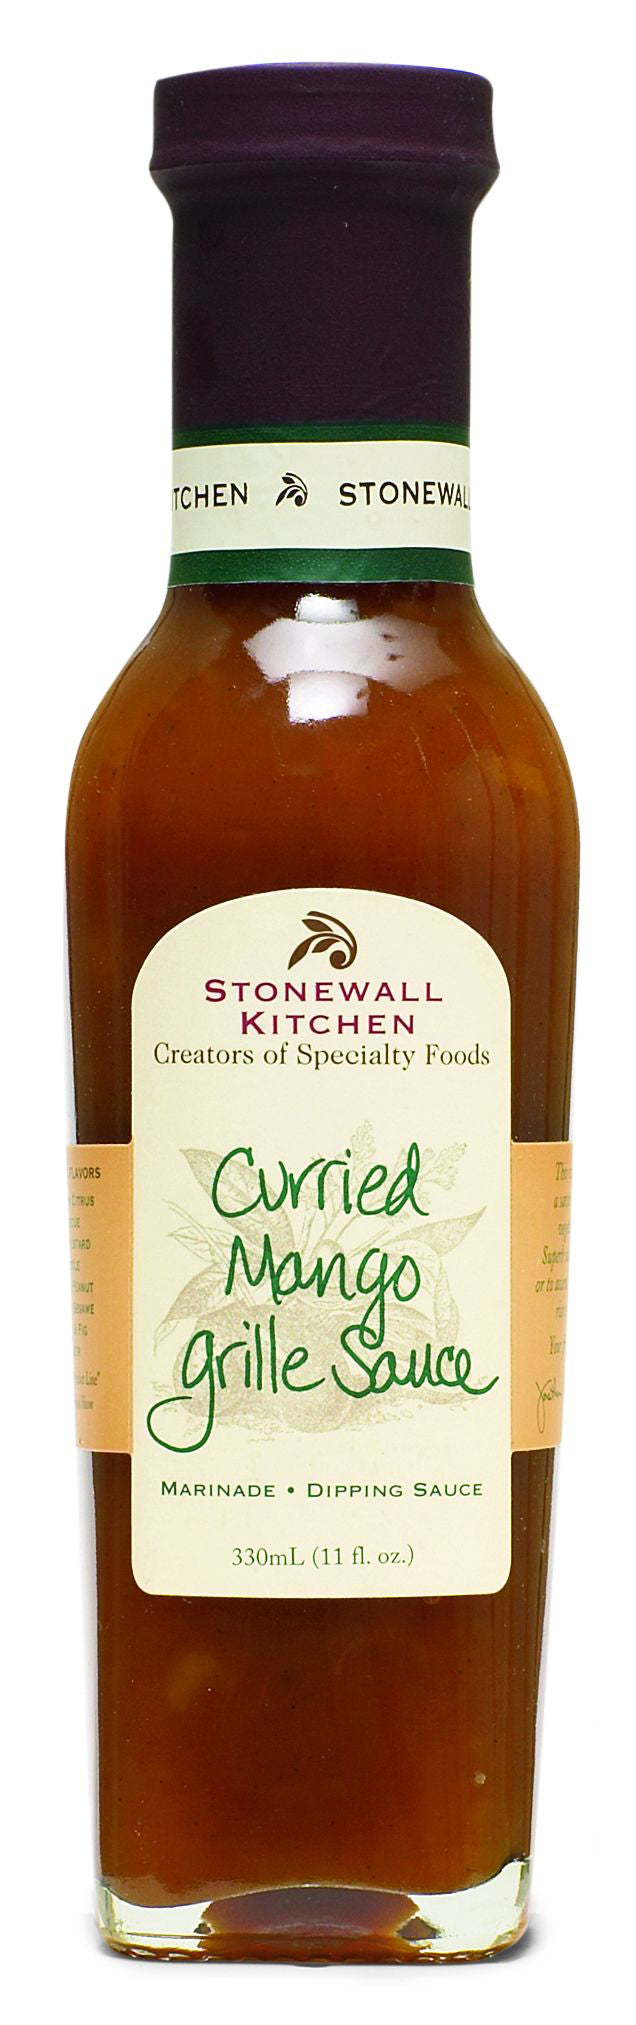 Stonewall Curried Mango Grille Sauce 330 ml